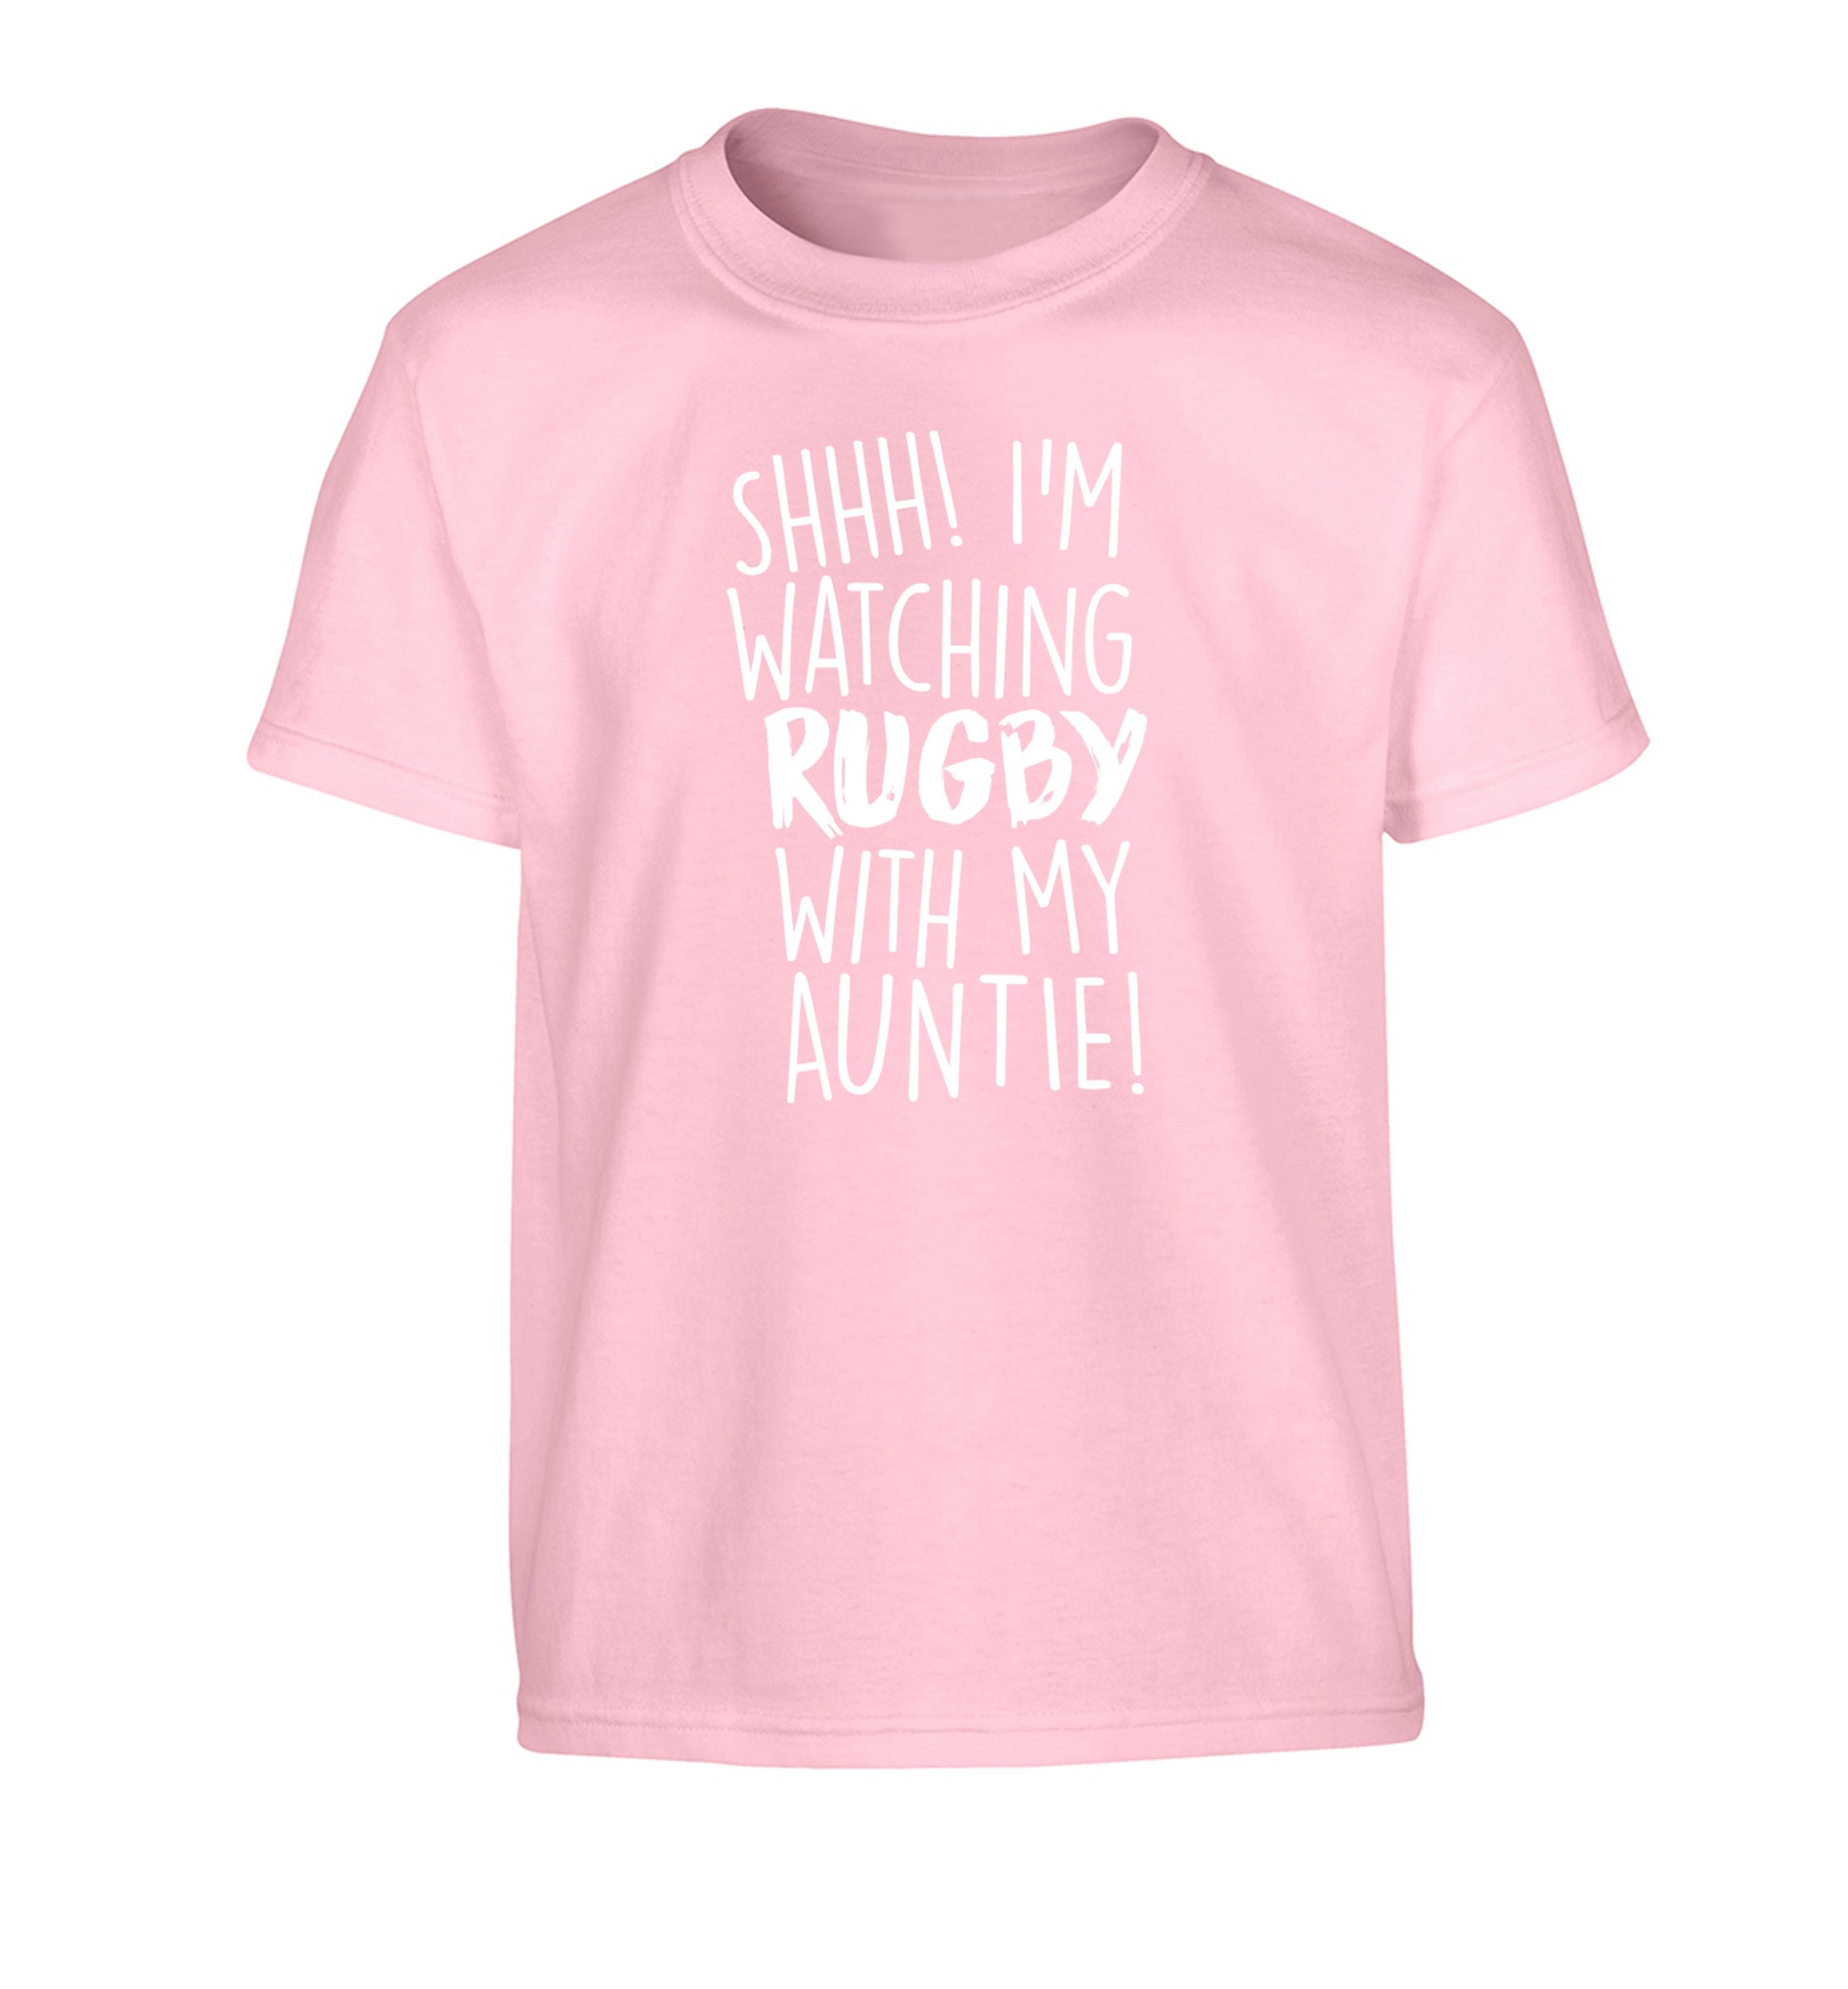 Shhh I'm watchin rugby with my auntie Children's light pink Tshirt 12-13 Years